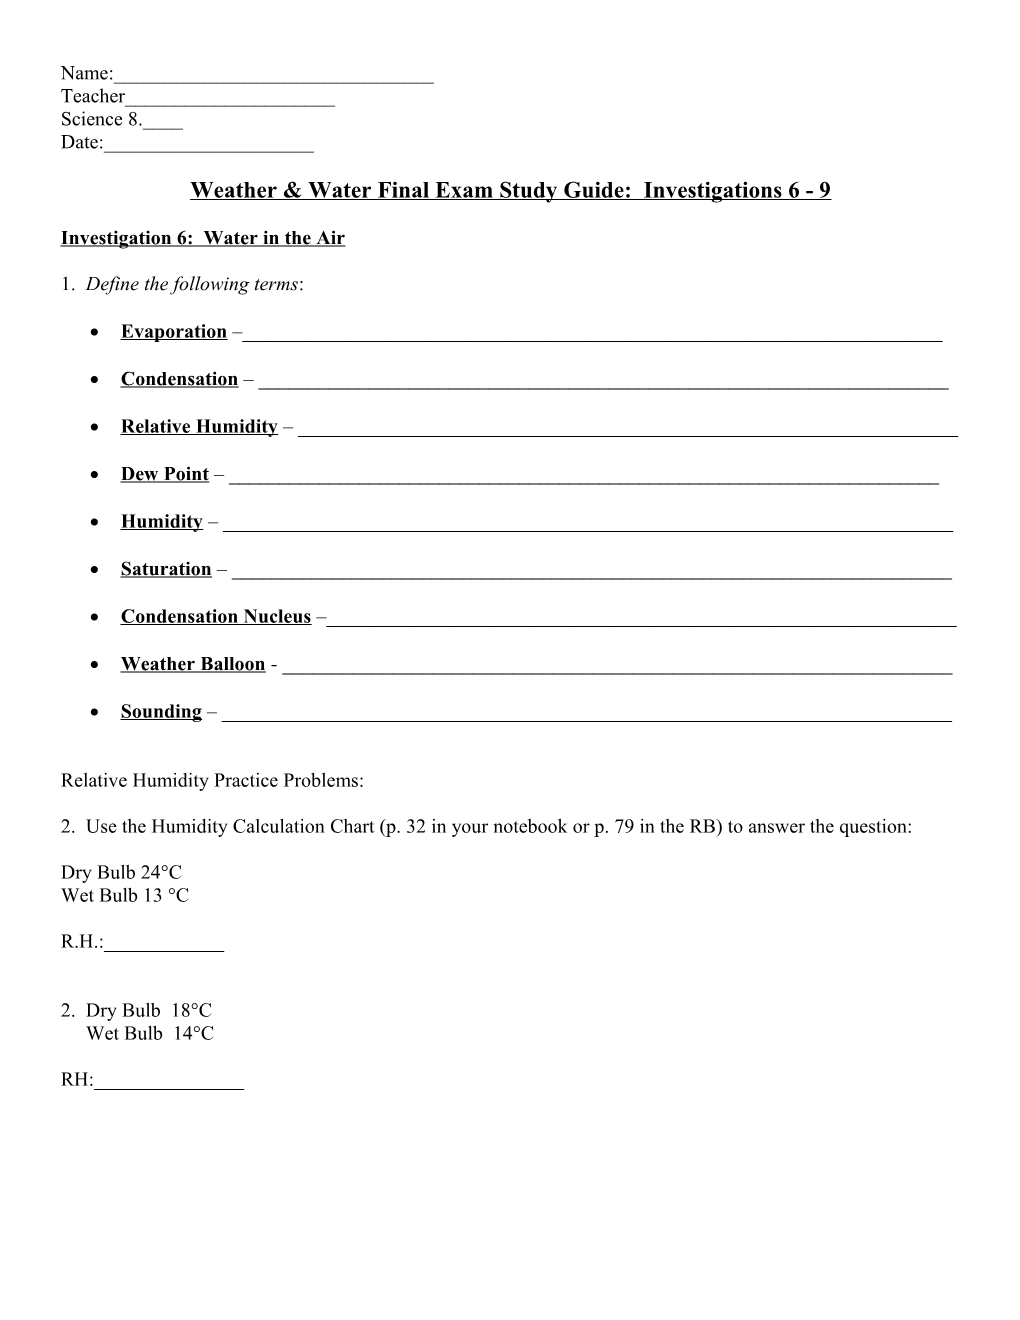 Weather & Water Final Exam Study Guide: Investigations 6 - 9